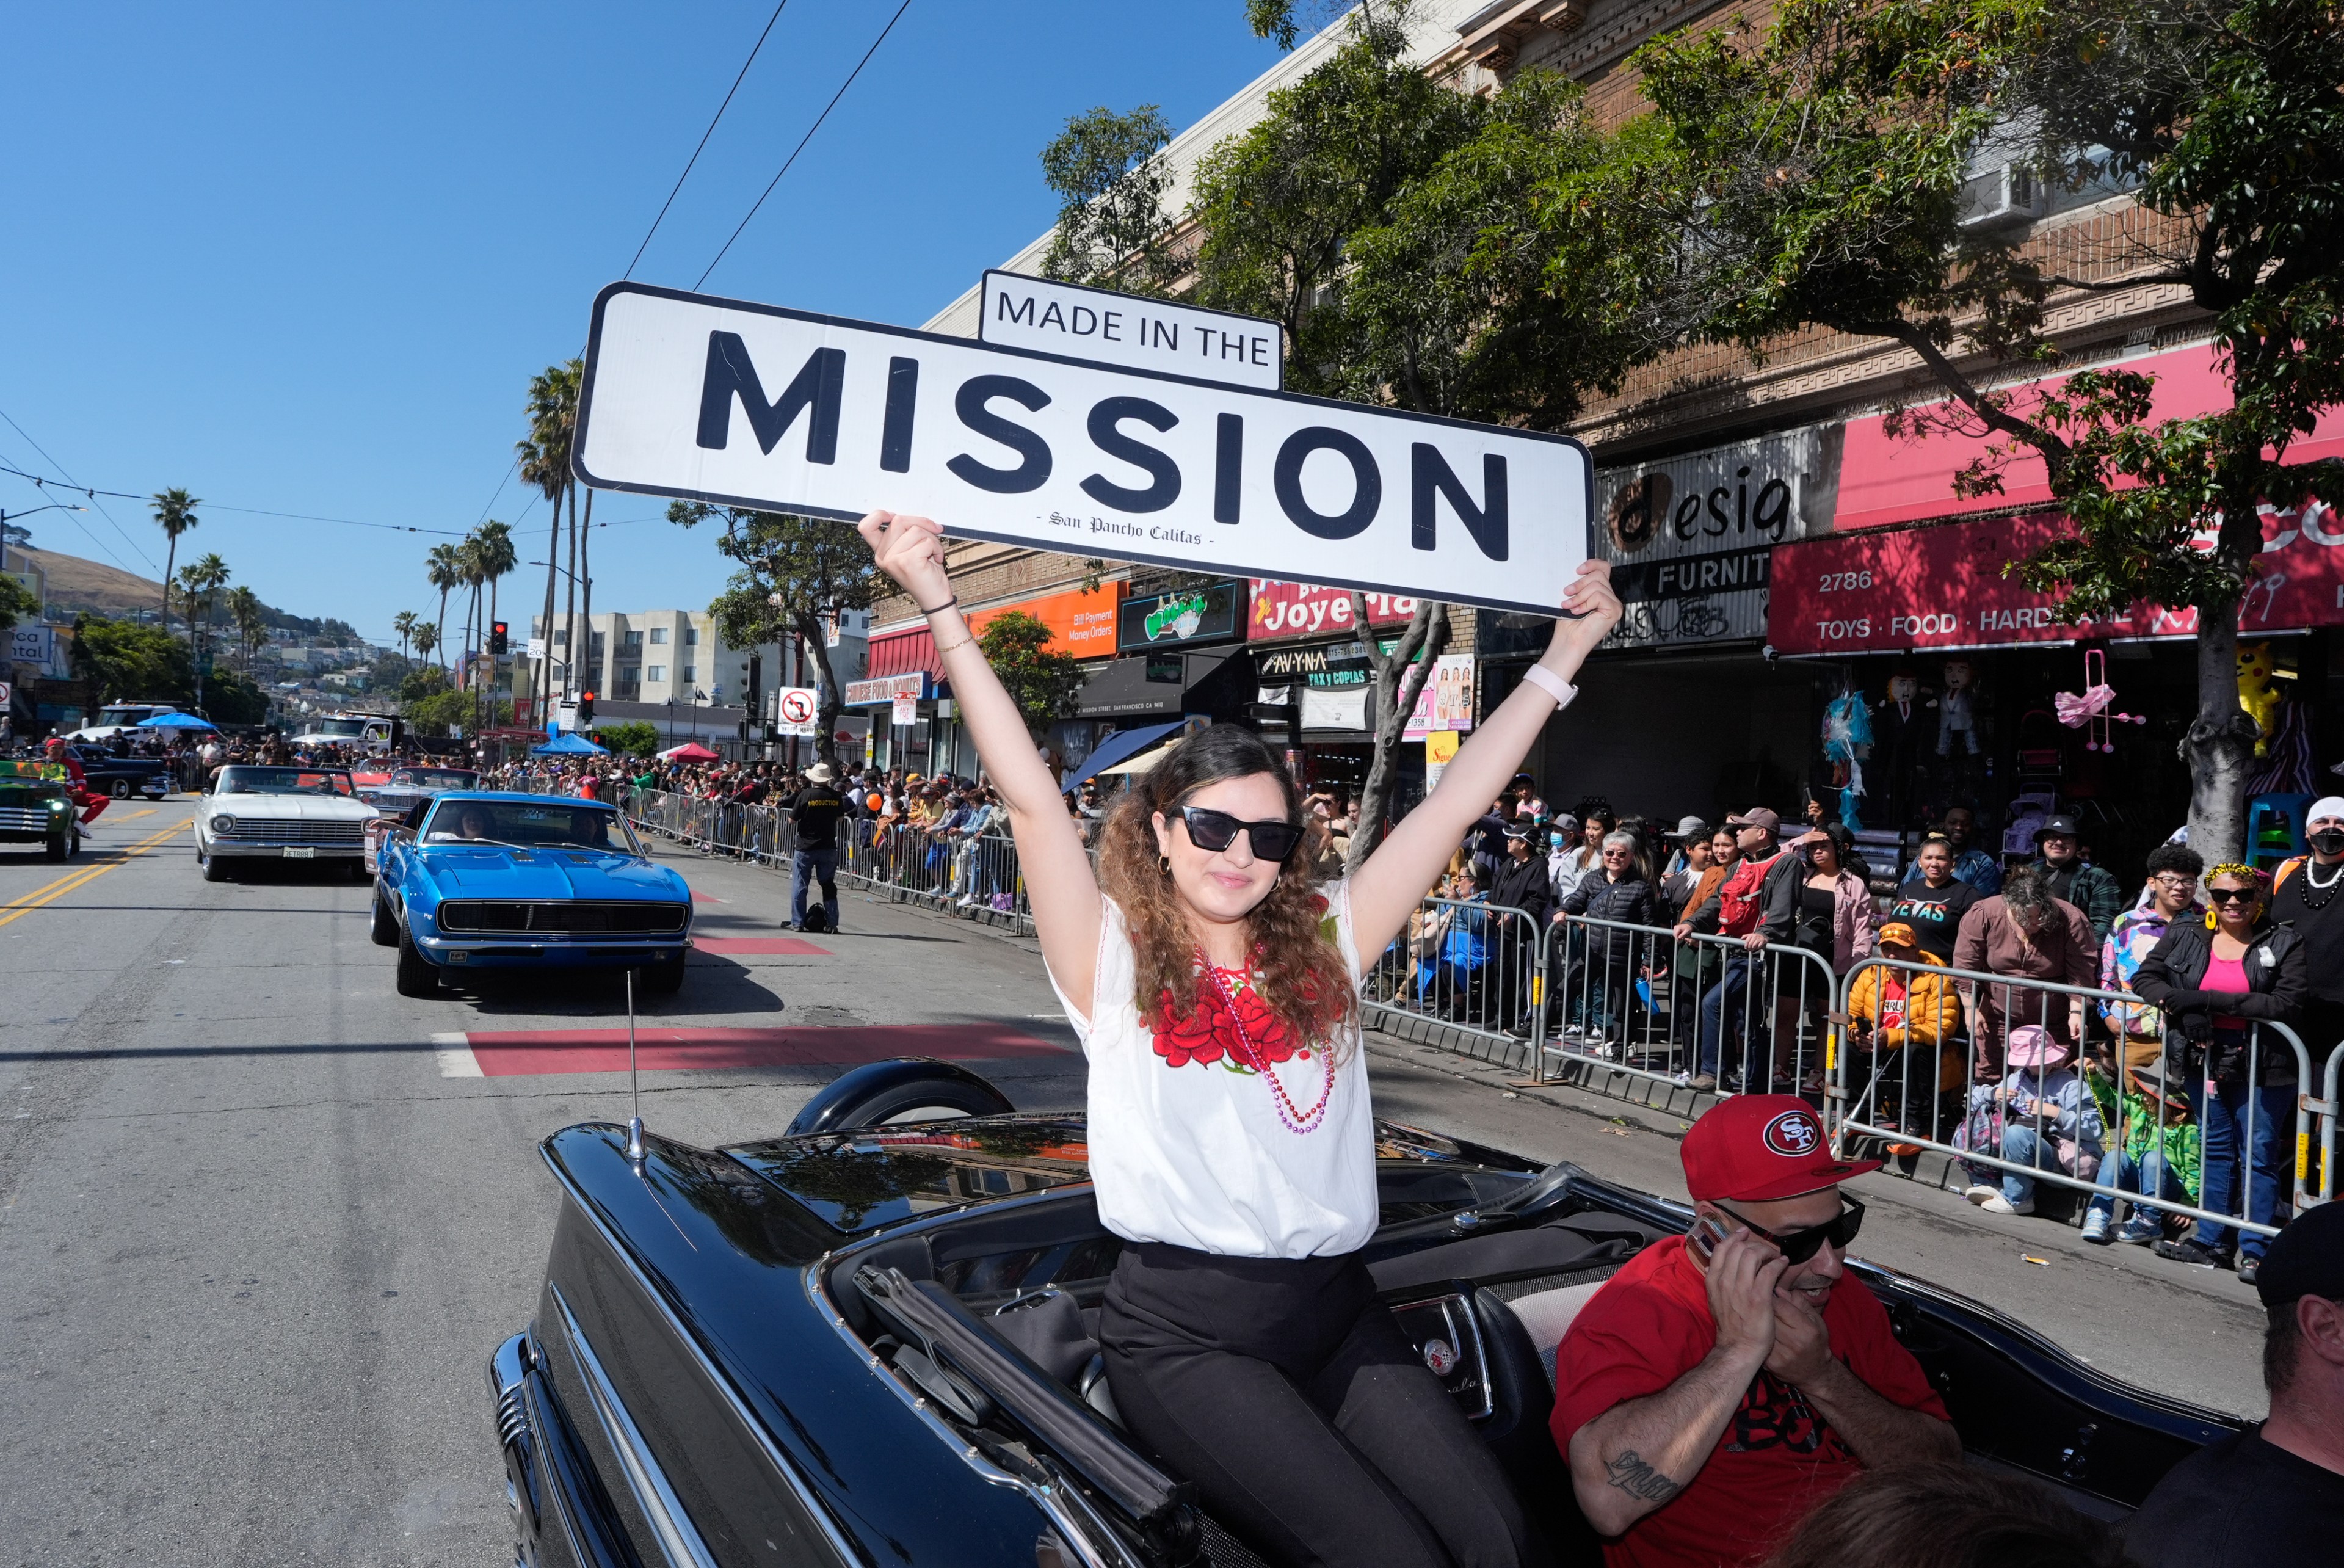 A woman in a red-embroidered white top and sunglasses holds a &quot;Made in the Mission&quot; sign, riding in a convertible during a parade with spectators lining the street.